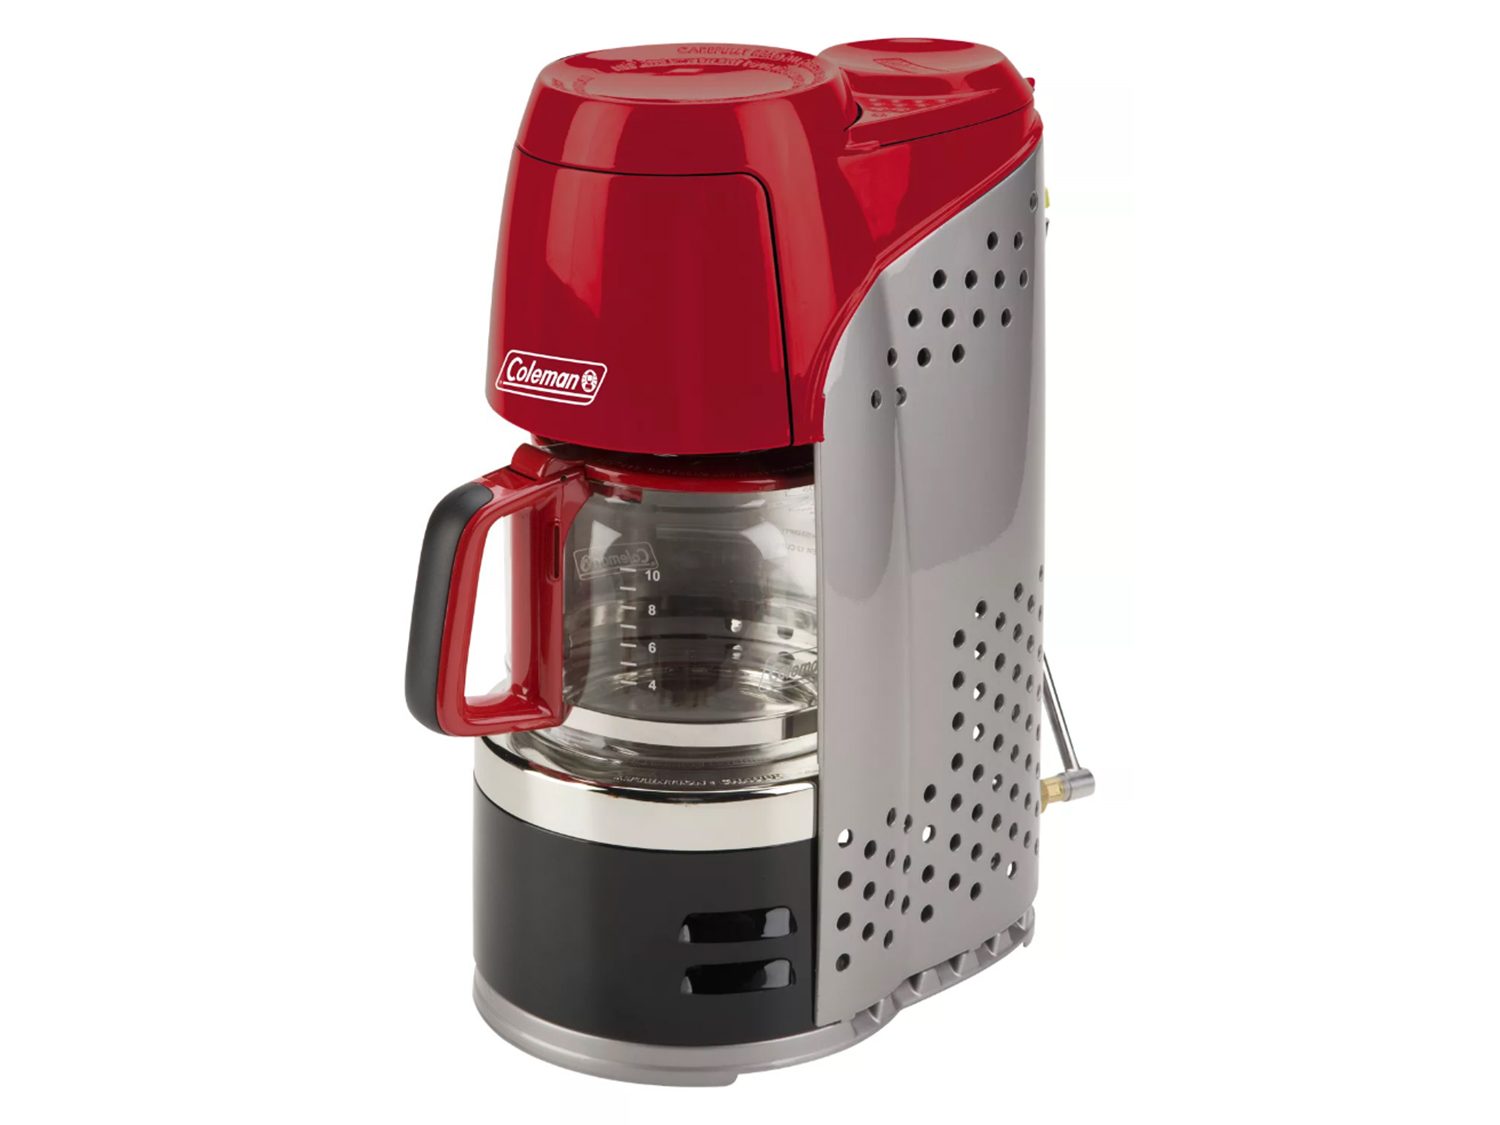 Coleman QuikPot Propane Coffeemaker is a great camping coffee maker.